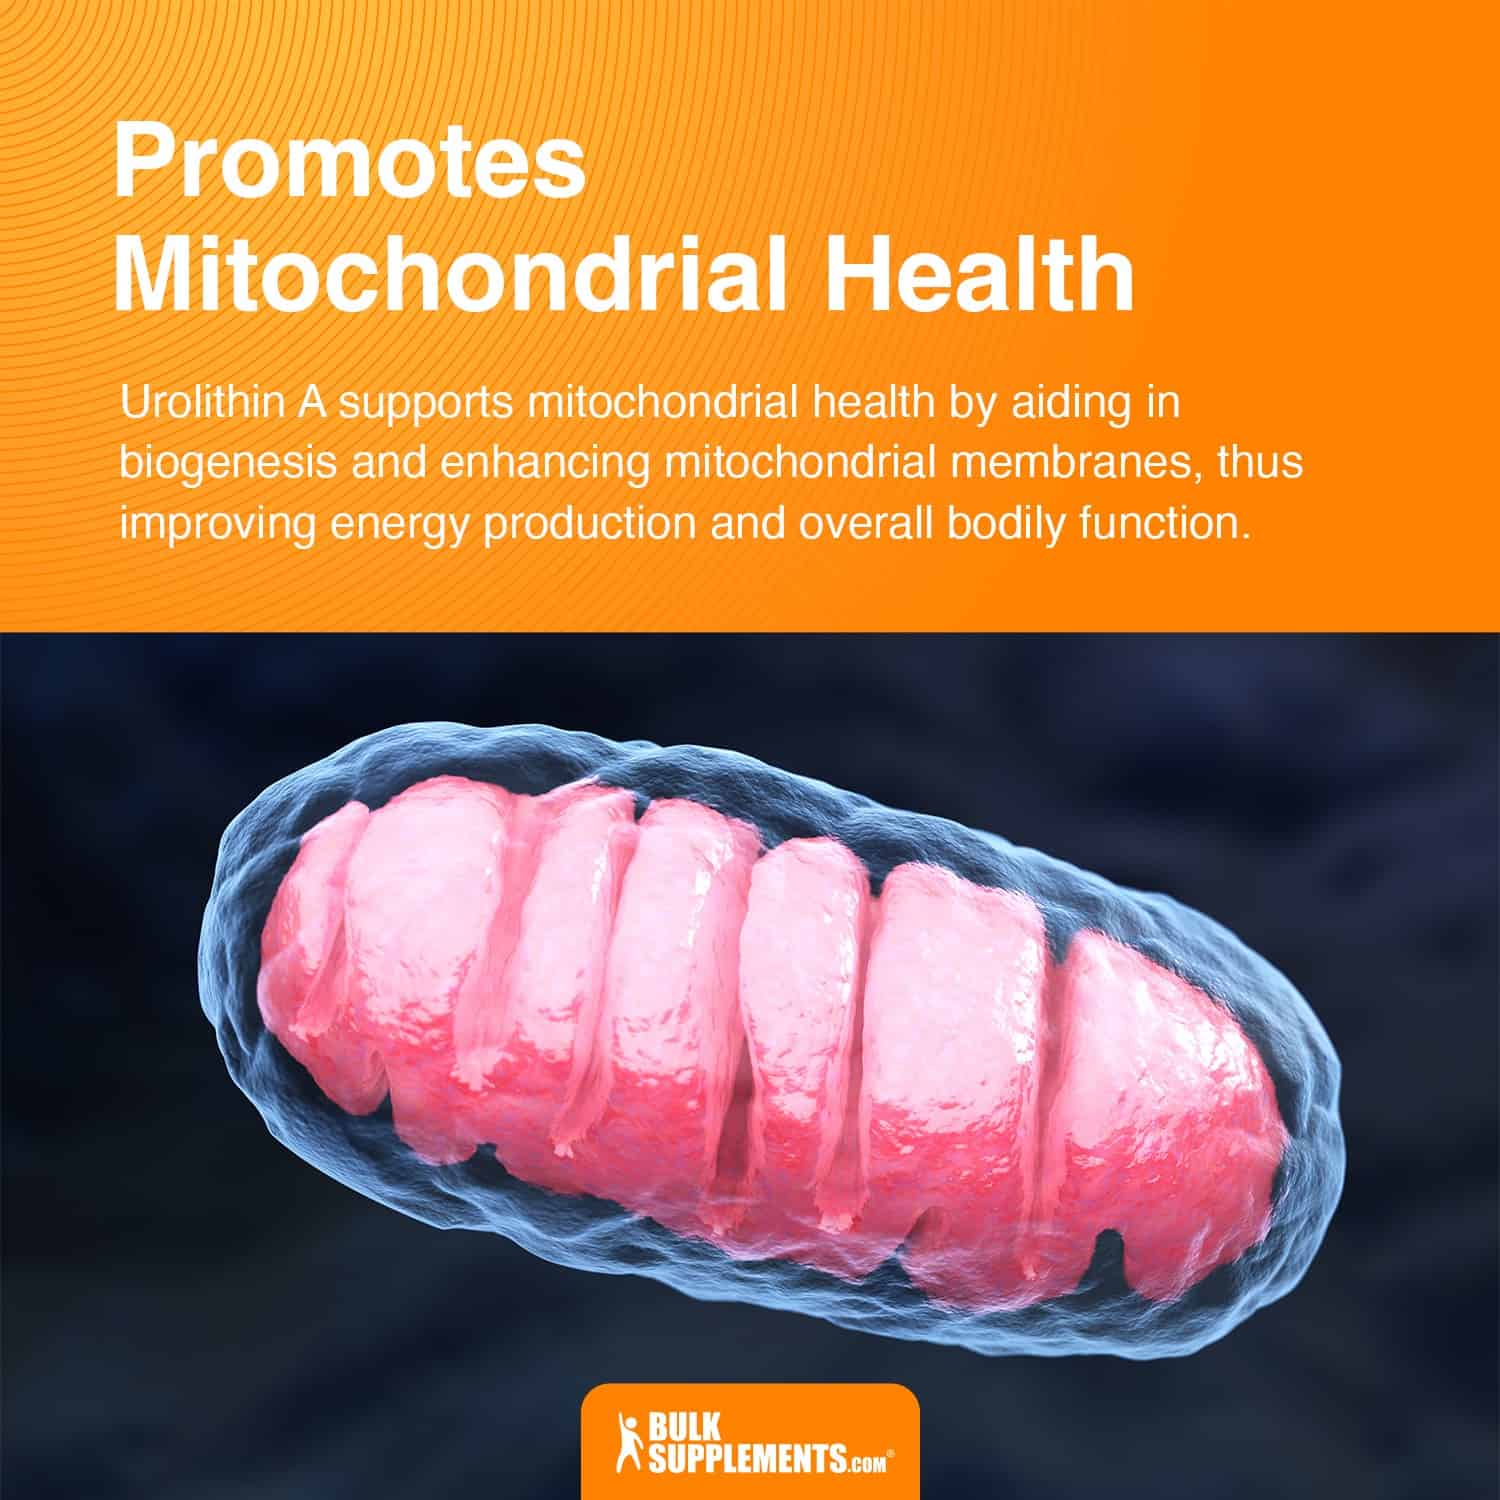 promotes Mitochondrial health Urolithin A